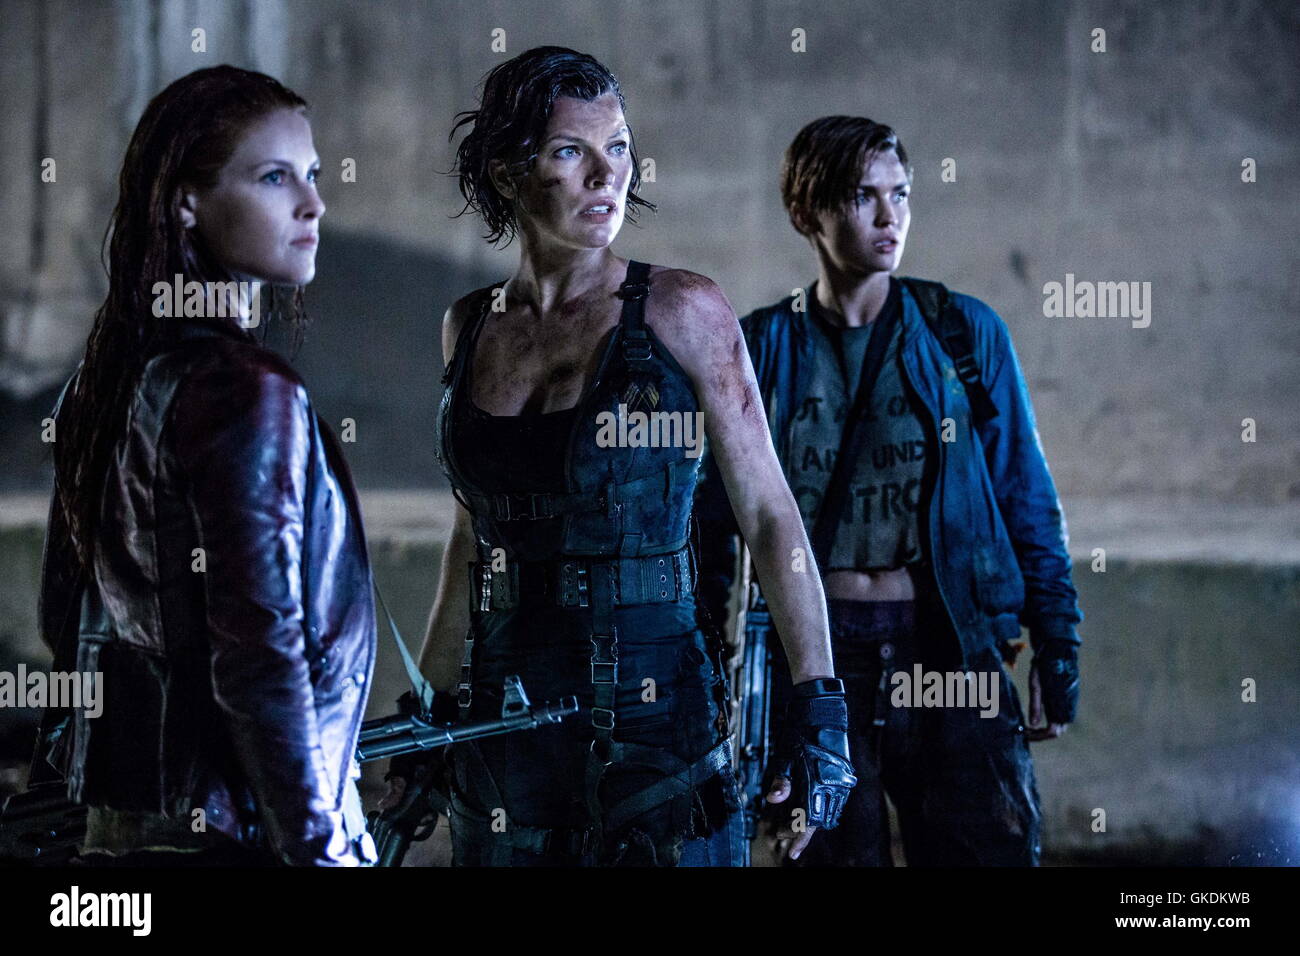 RELEASE DATE: January 27, 2017 TITLE: Resident Evil: The Final Chapter STUDIO: Screen Gems DIRECTOR: Paul W.S. Anderson PLOT: Picking up immediately after the events in Resident Evil: Retribution, humanity is on its last legs in Washington D.C. As the only survivor of what was meant to be humanity's final stand STARRING: Ali Larter, Milla Jovovich, Ruby Rose (Credit: c Screen Gems/Entertainment Pictures/) Stock Photo